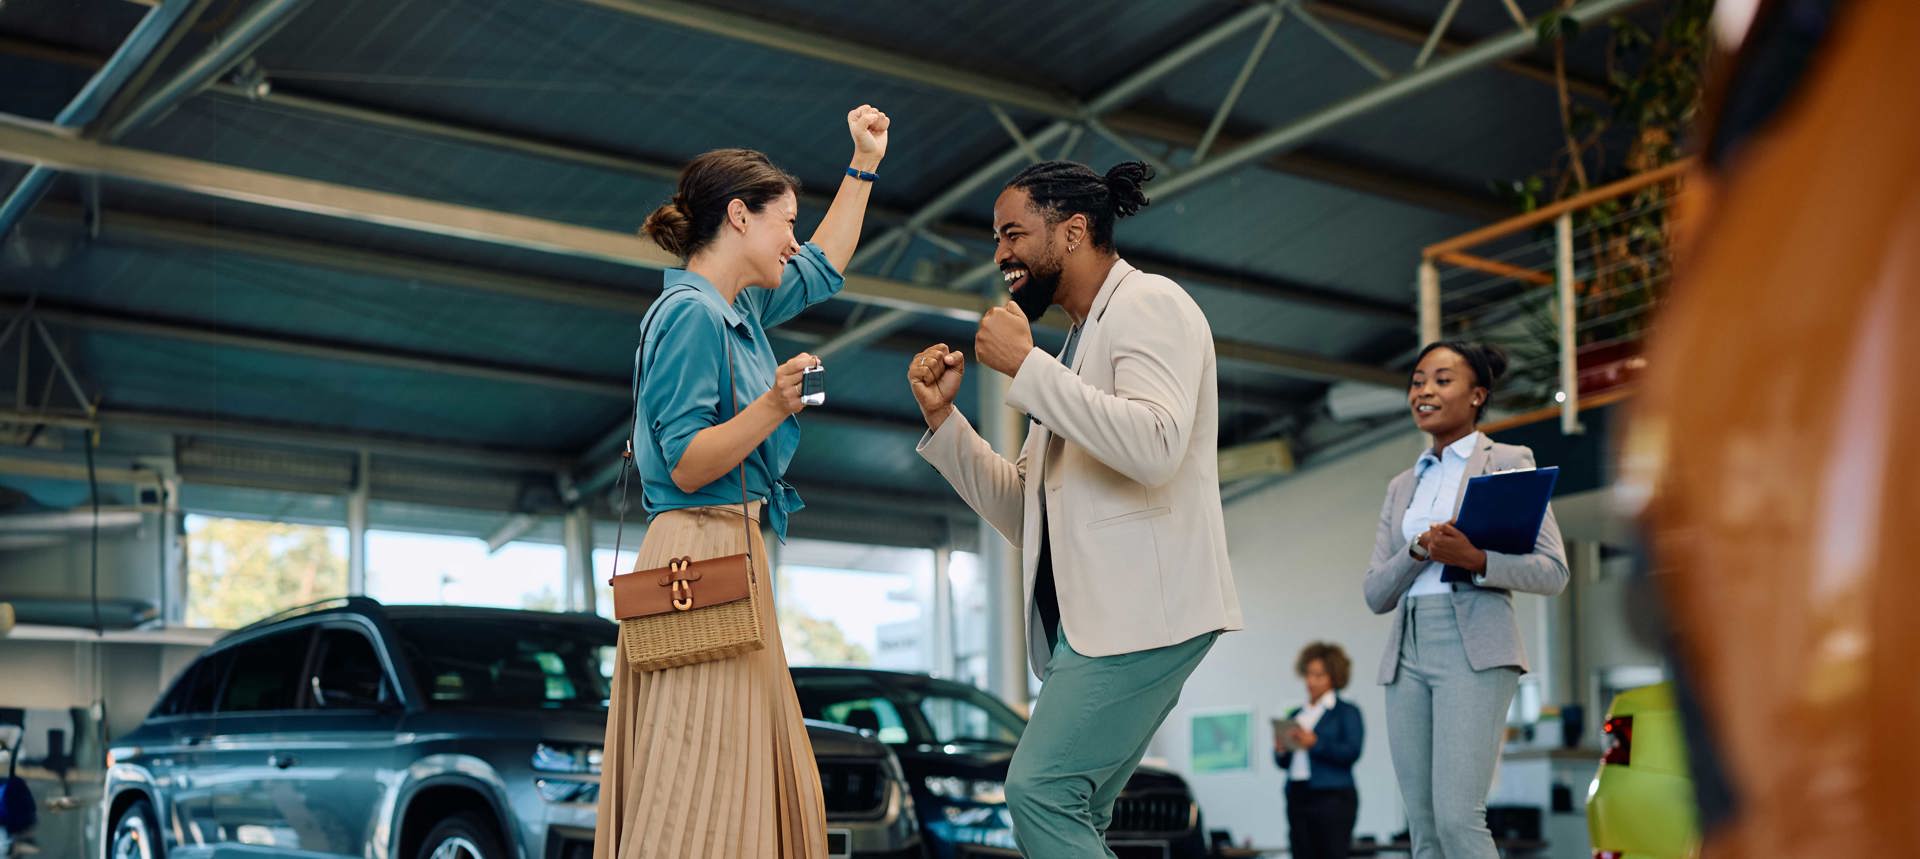 Two people dancing in a car dealership with the words 'more sales' in the background